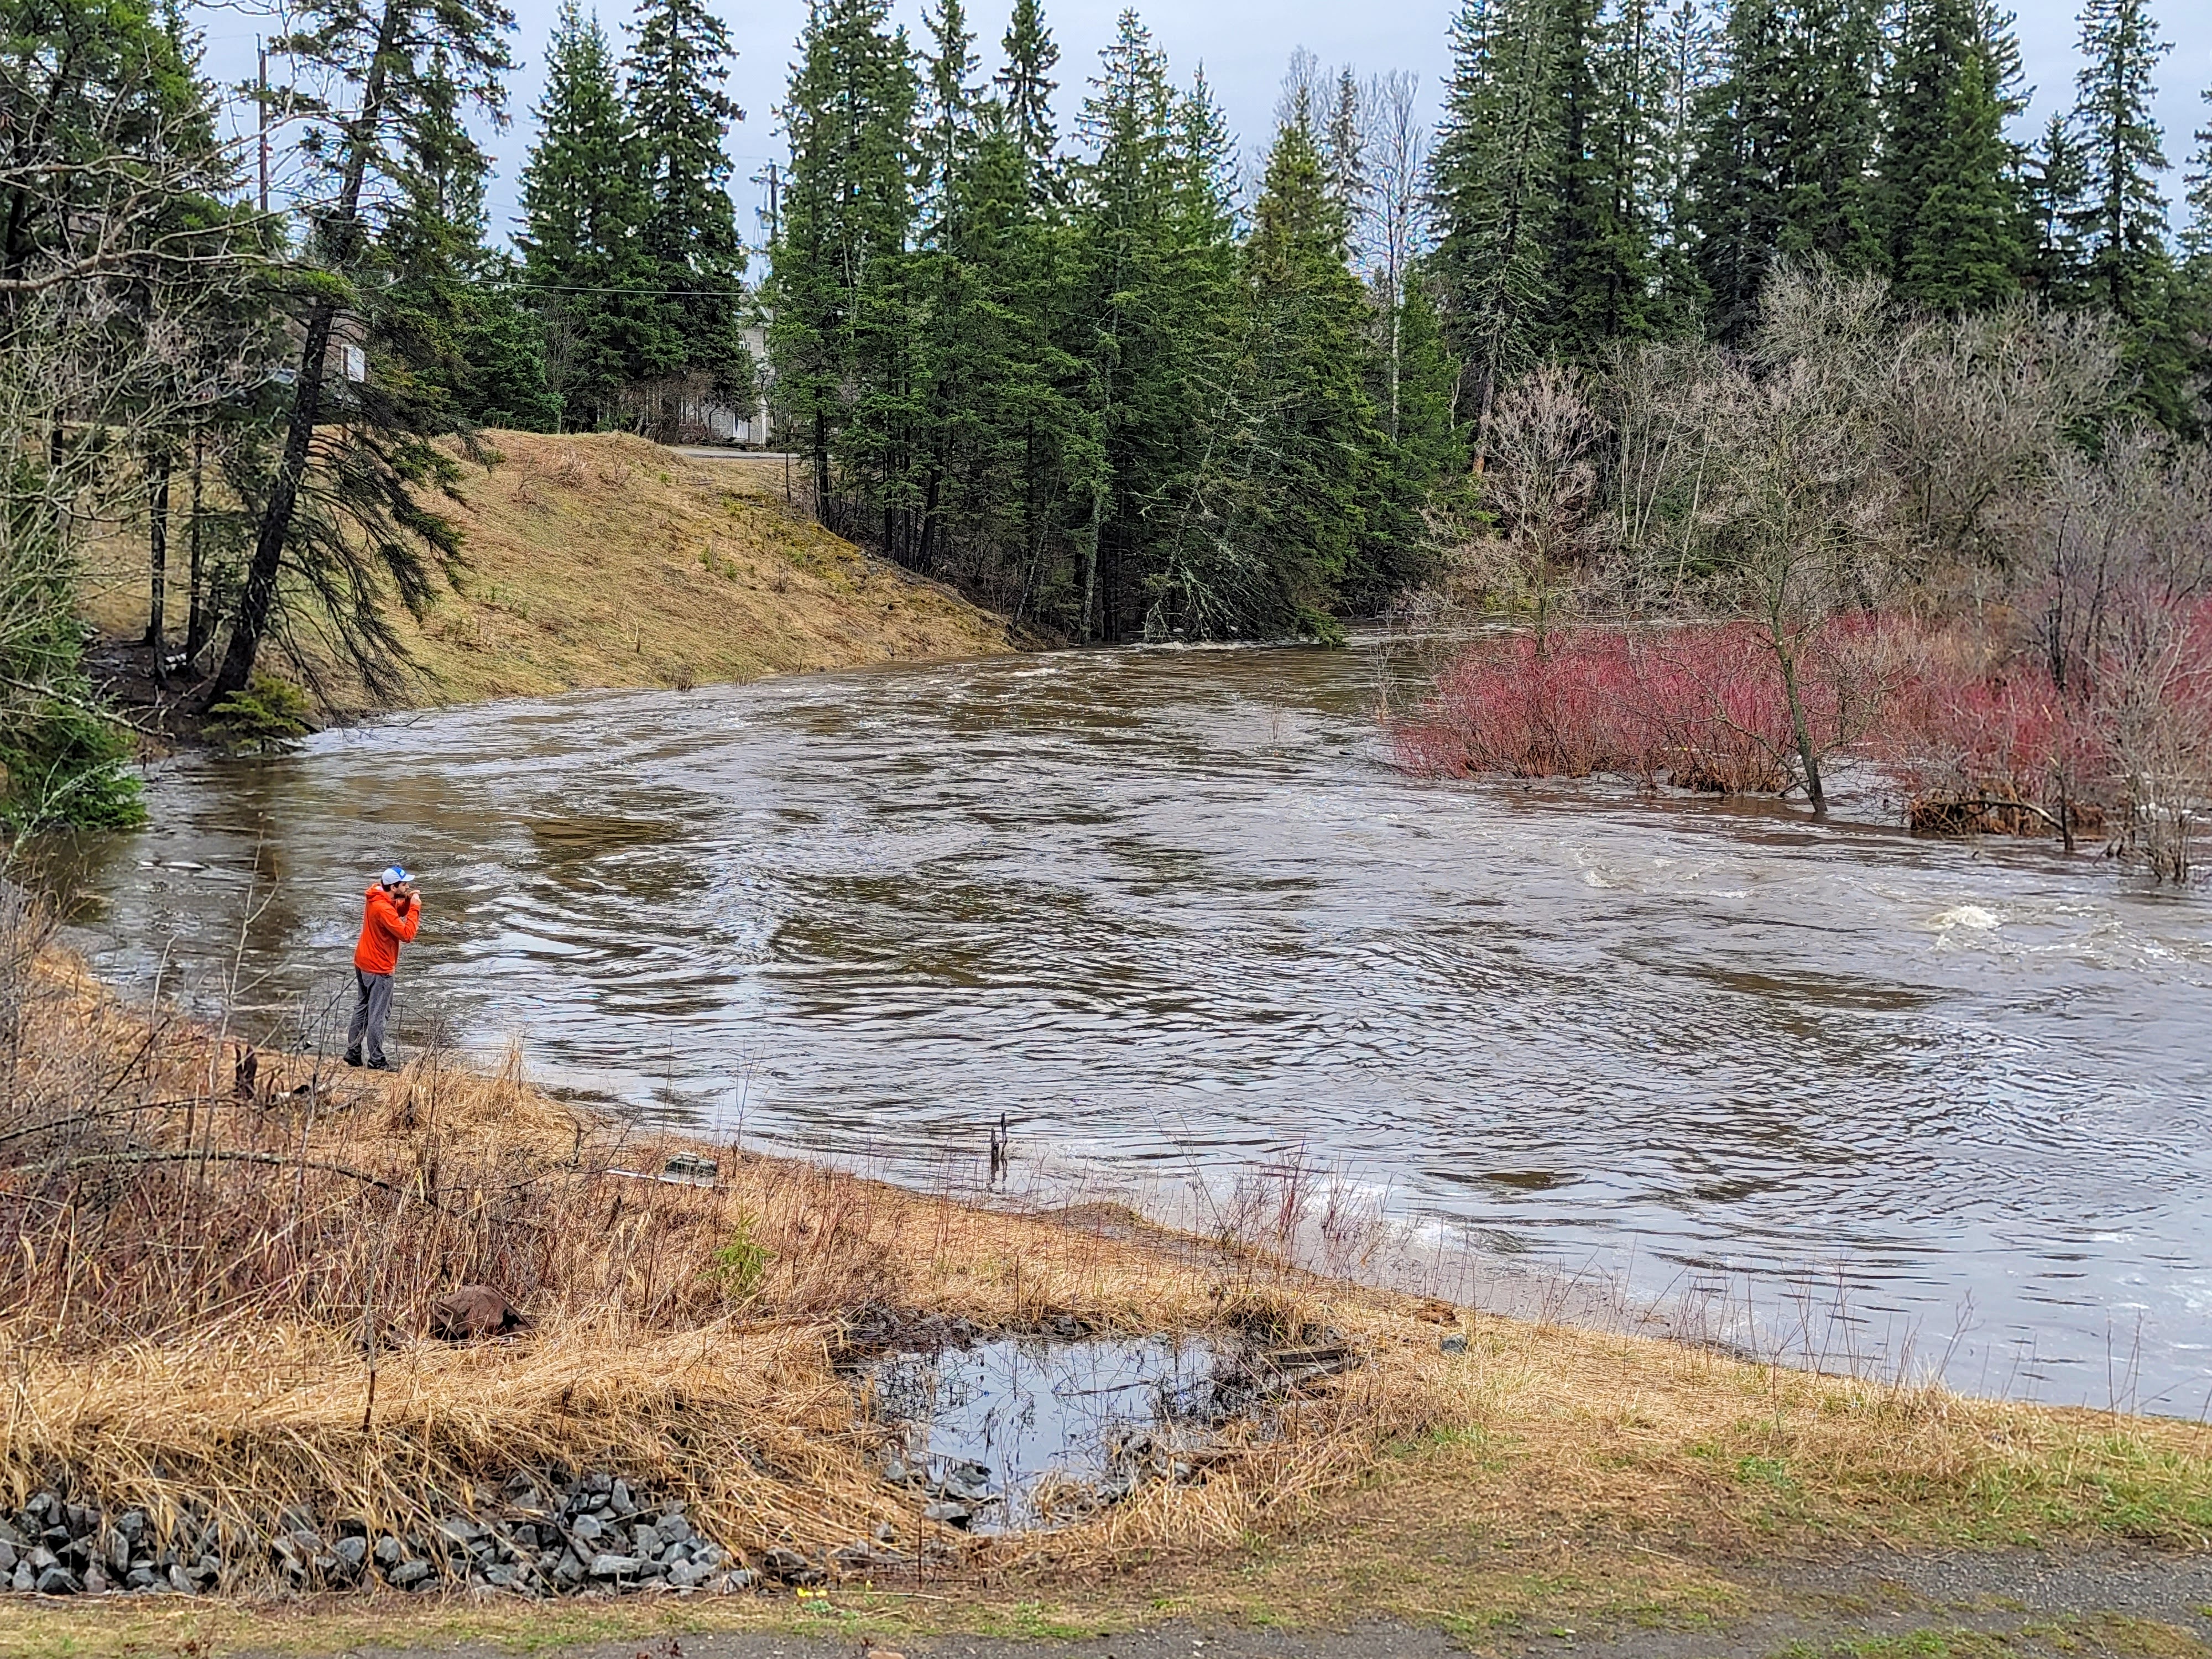 A person fishing on the banks of the McIntyre River, its water extra high with runoff and running fast.  